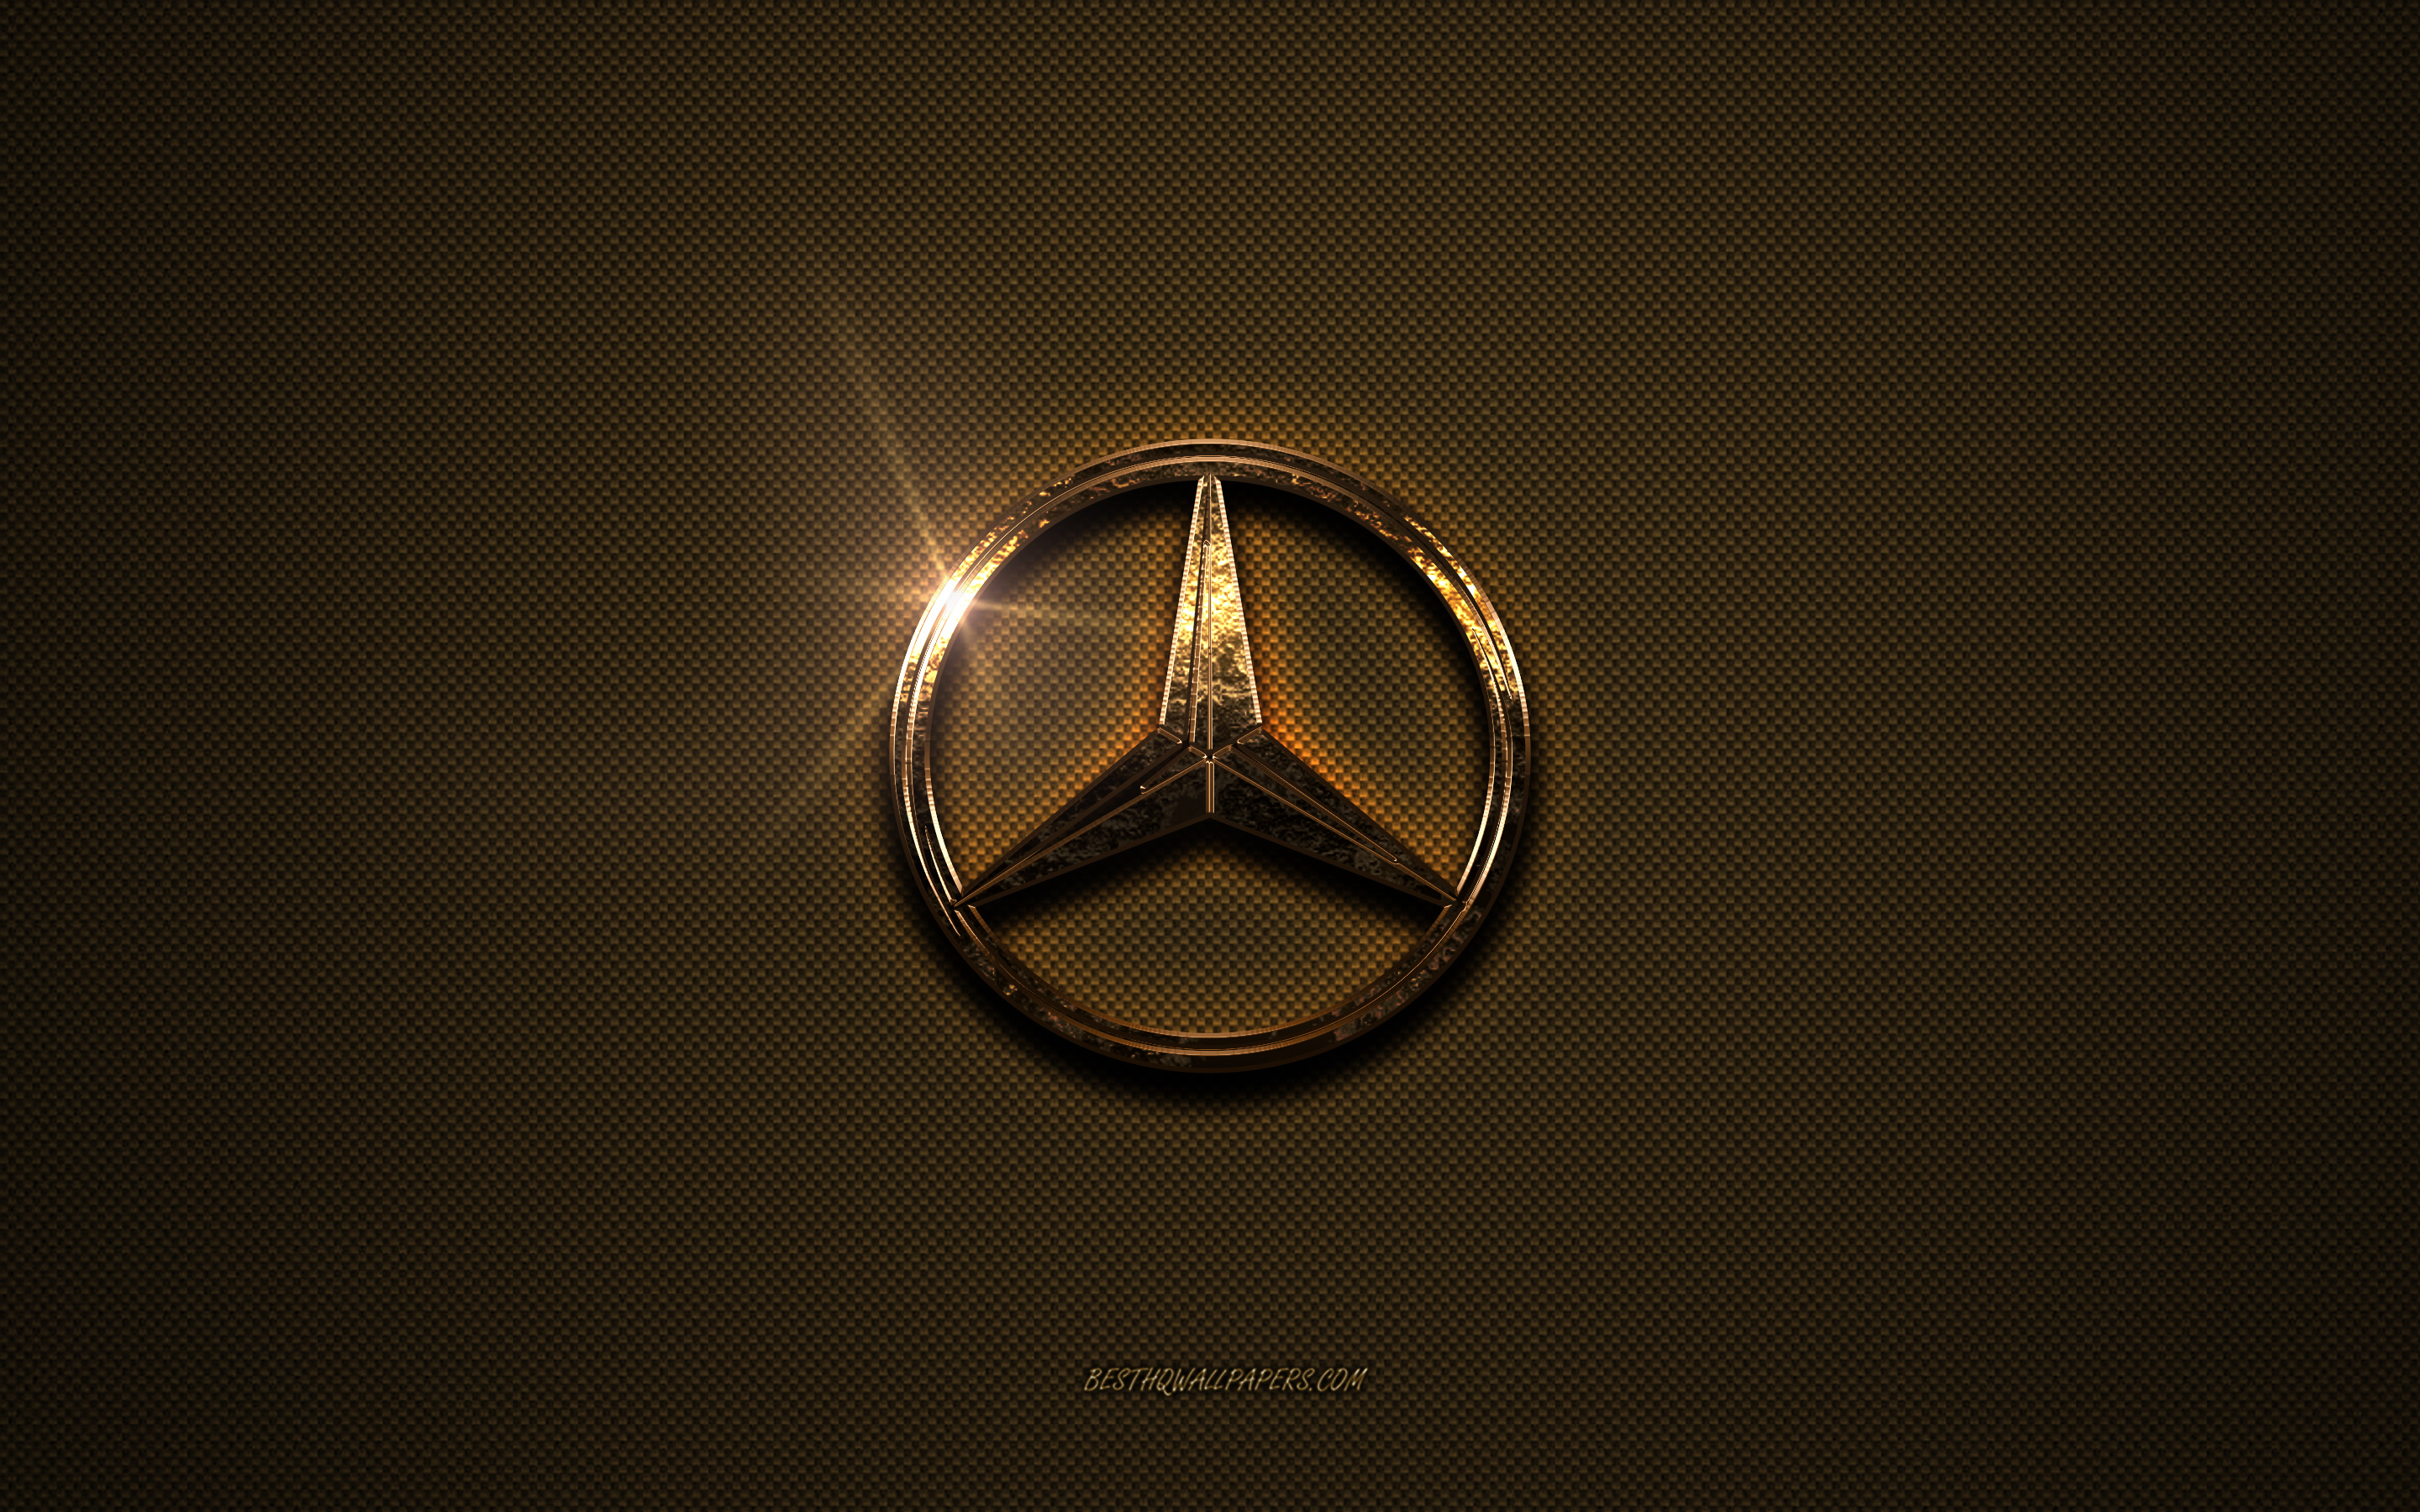 Gold Benz Wallpapers